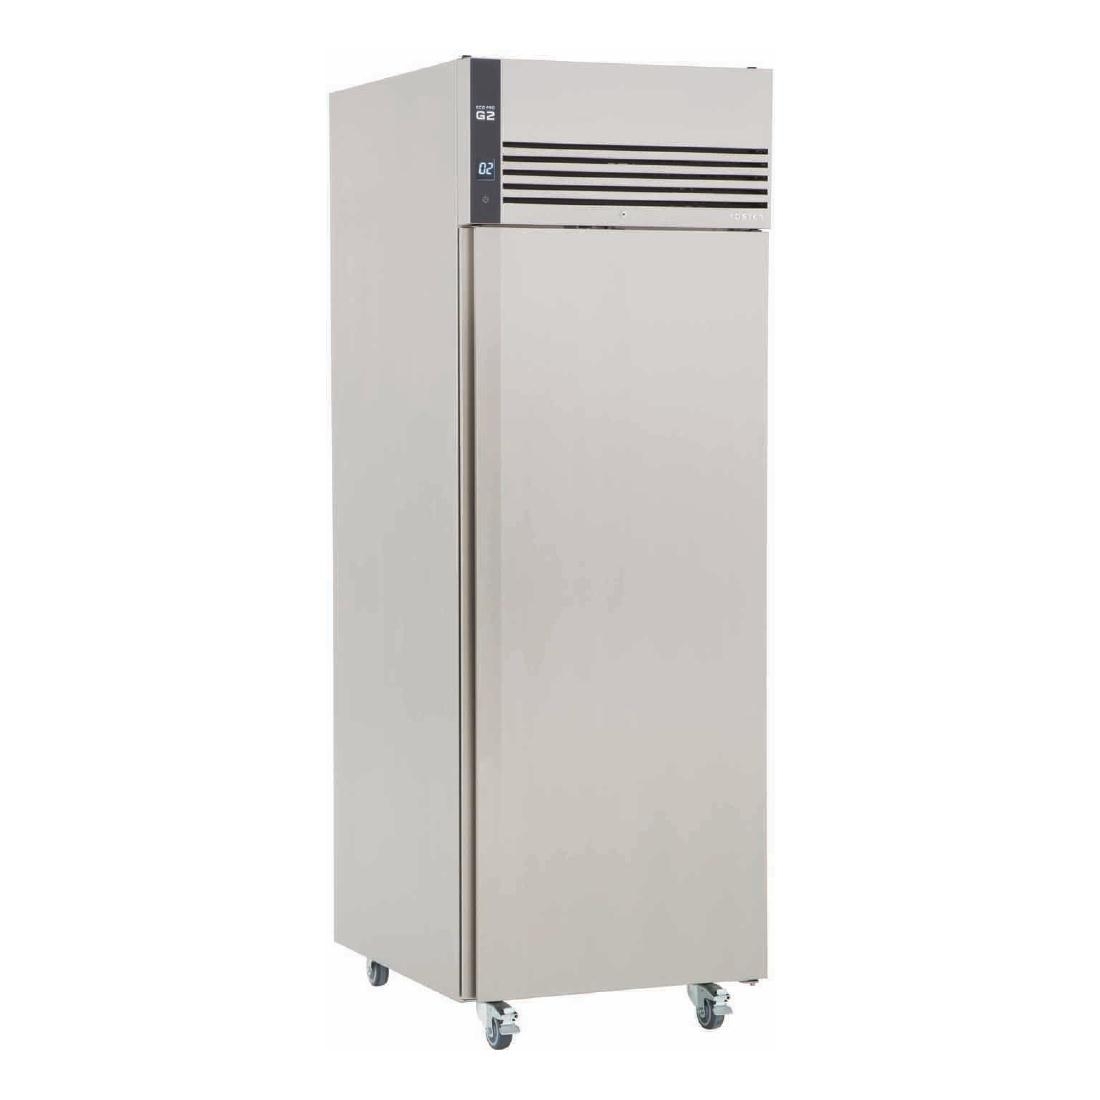 Foster EcoPro G2 1 Door 600Ltr Cabinet Meat Fridge with Back EP700M 10/121